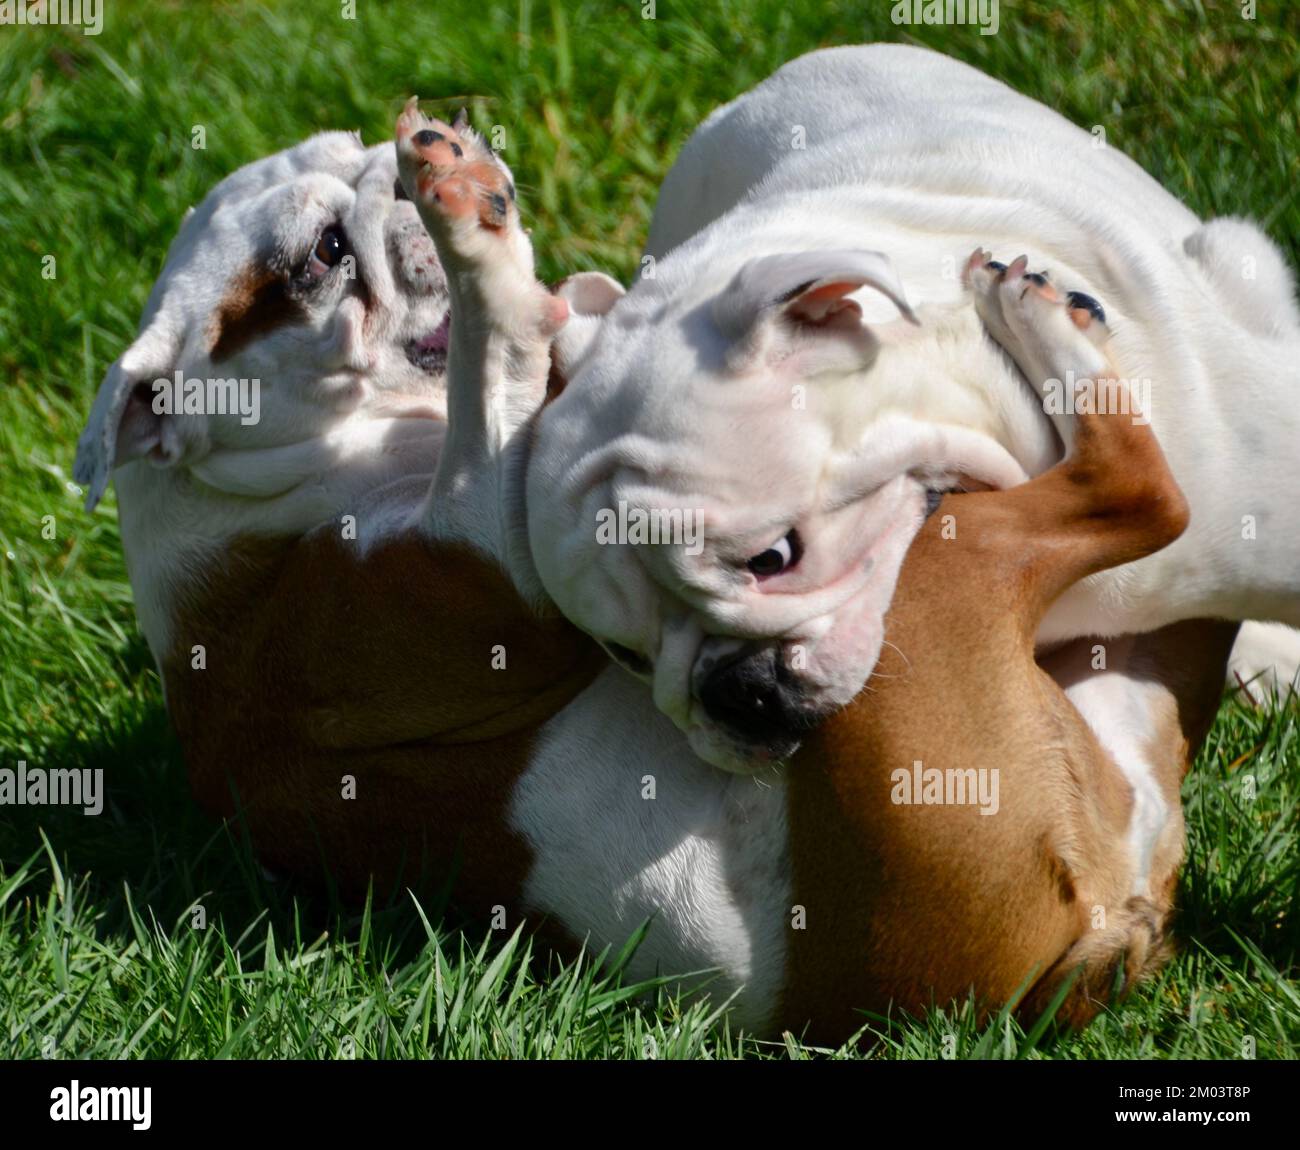 Two British or English pedigree or purebred bulldogs, one dog a puppy, playing and play fighting on the lawn in the garden. Stock Photo